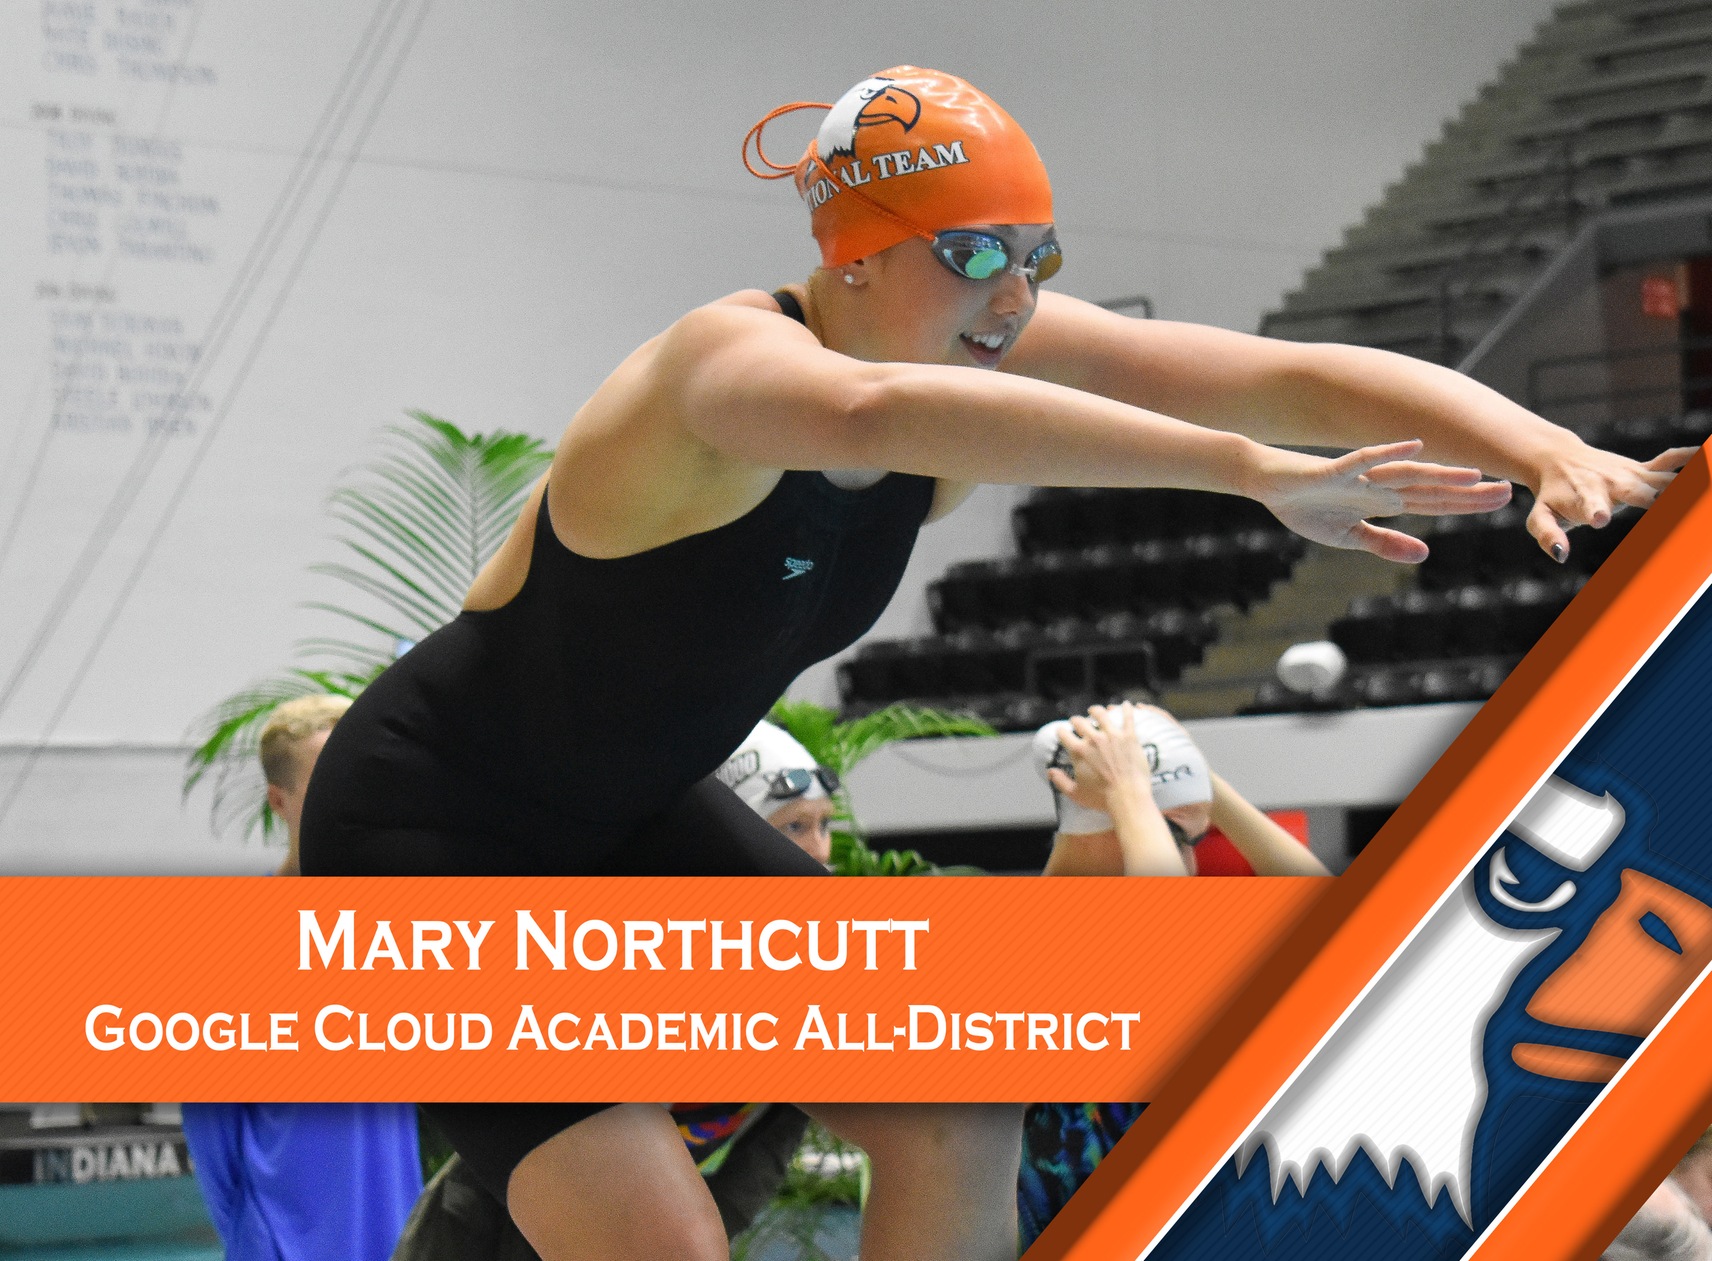 Northcutt goes back-to-back with Google Cloud Academic All-District honor